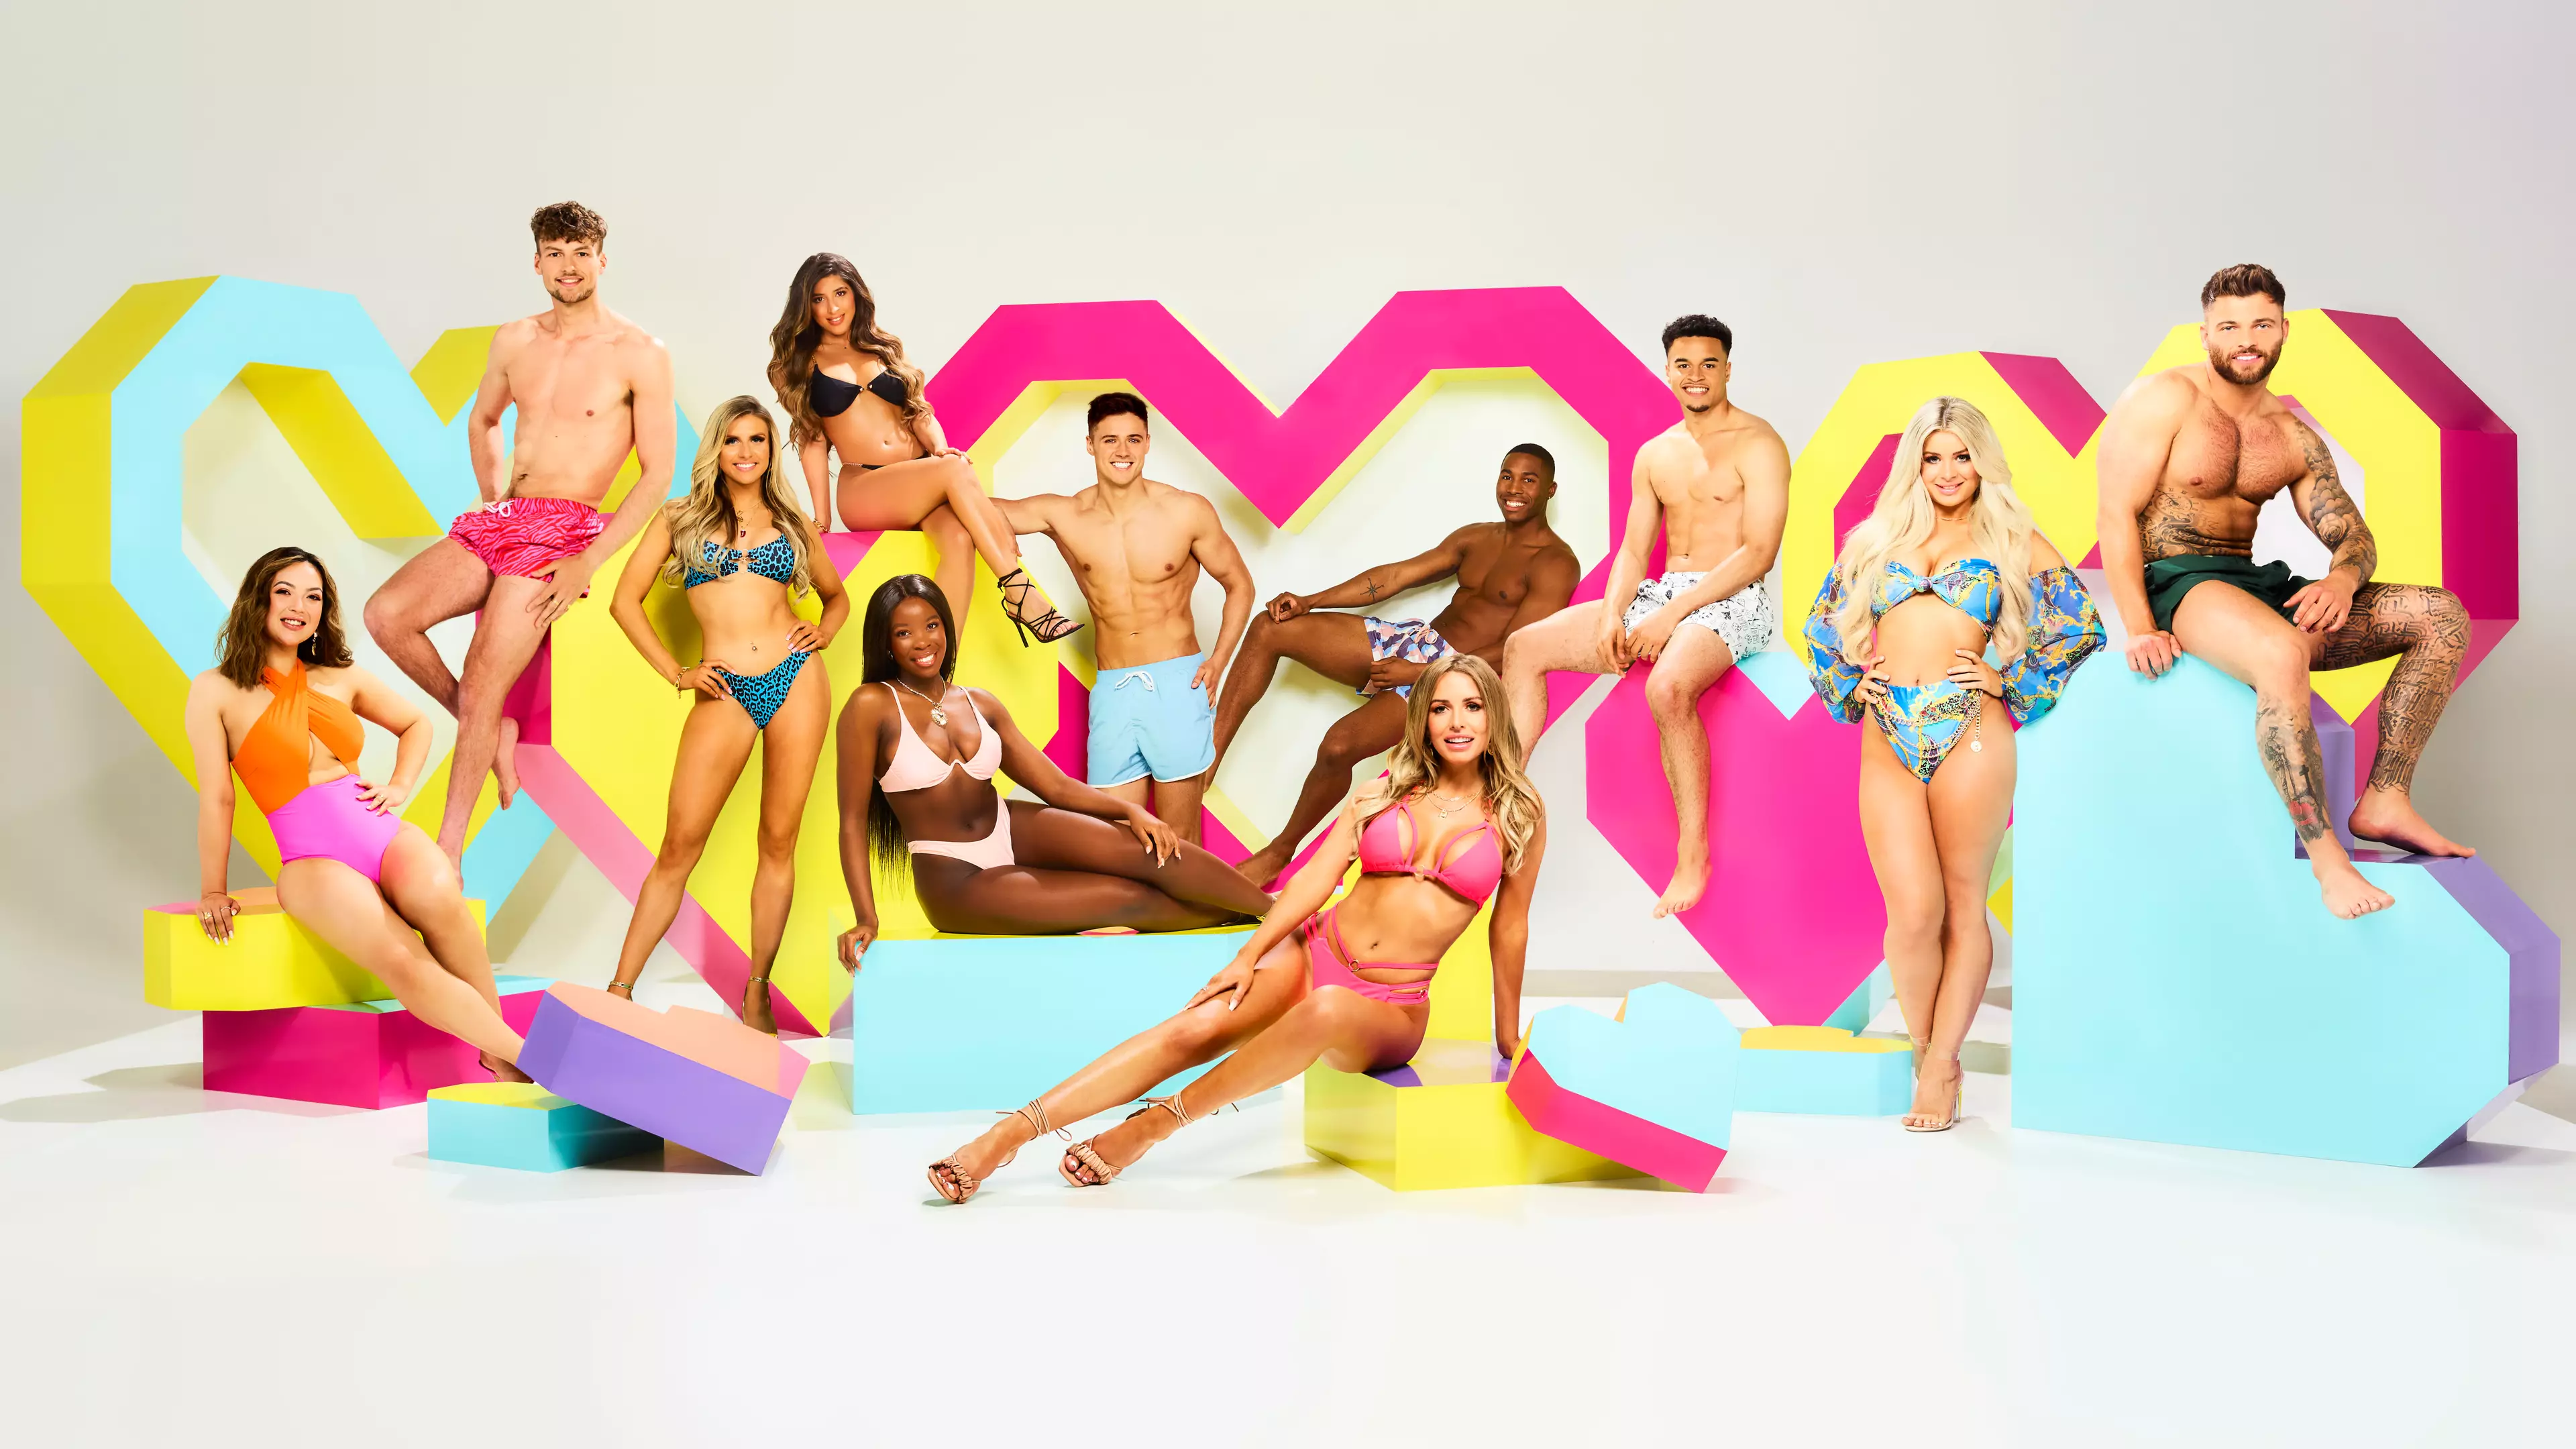 Who’s On Love Island This Year?